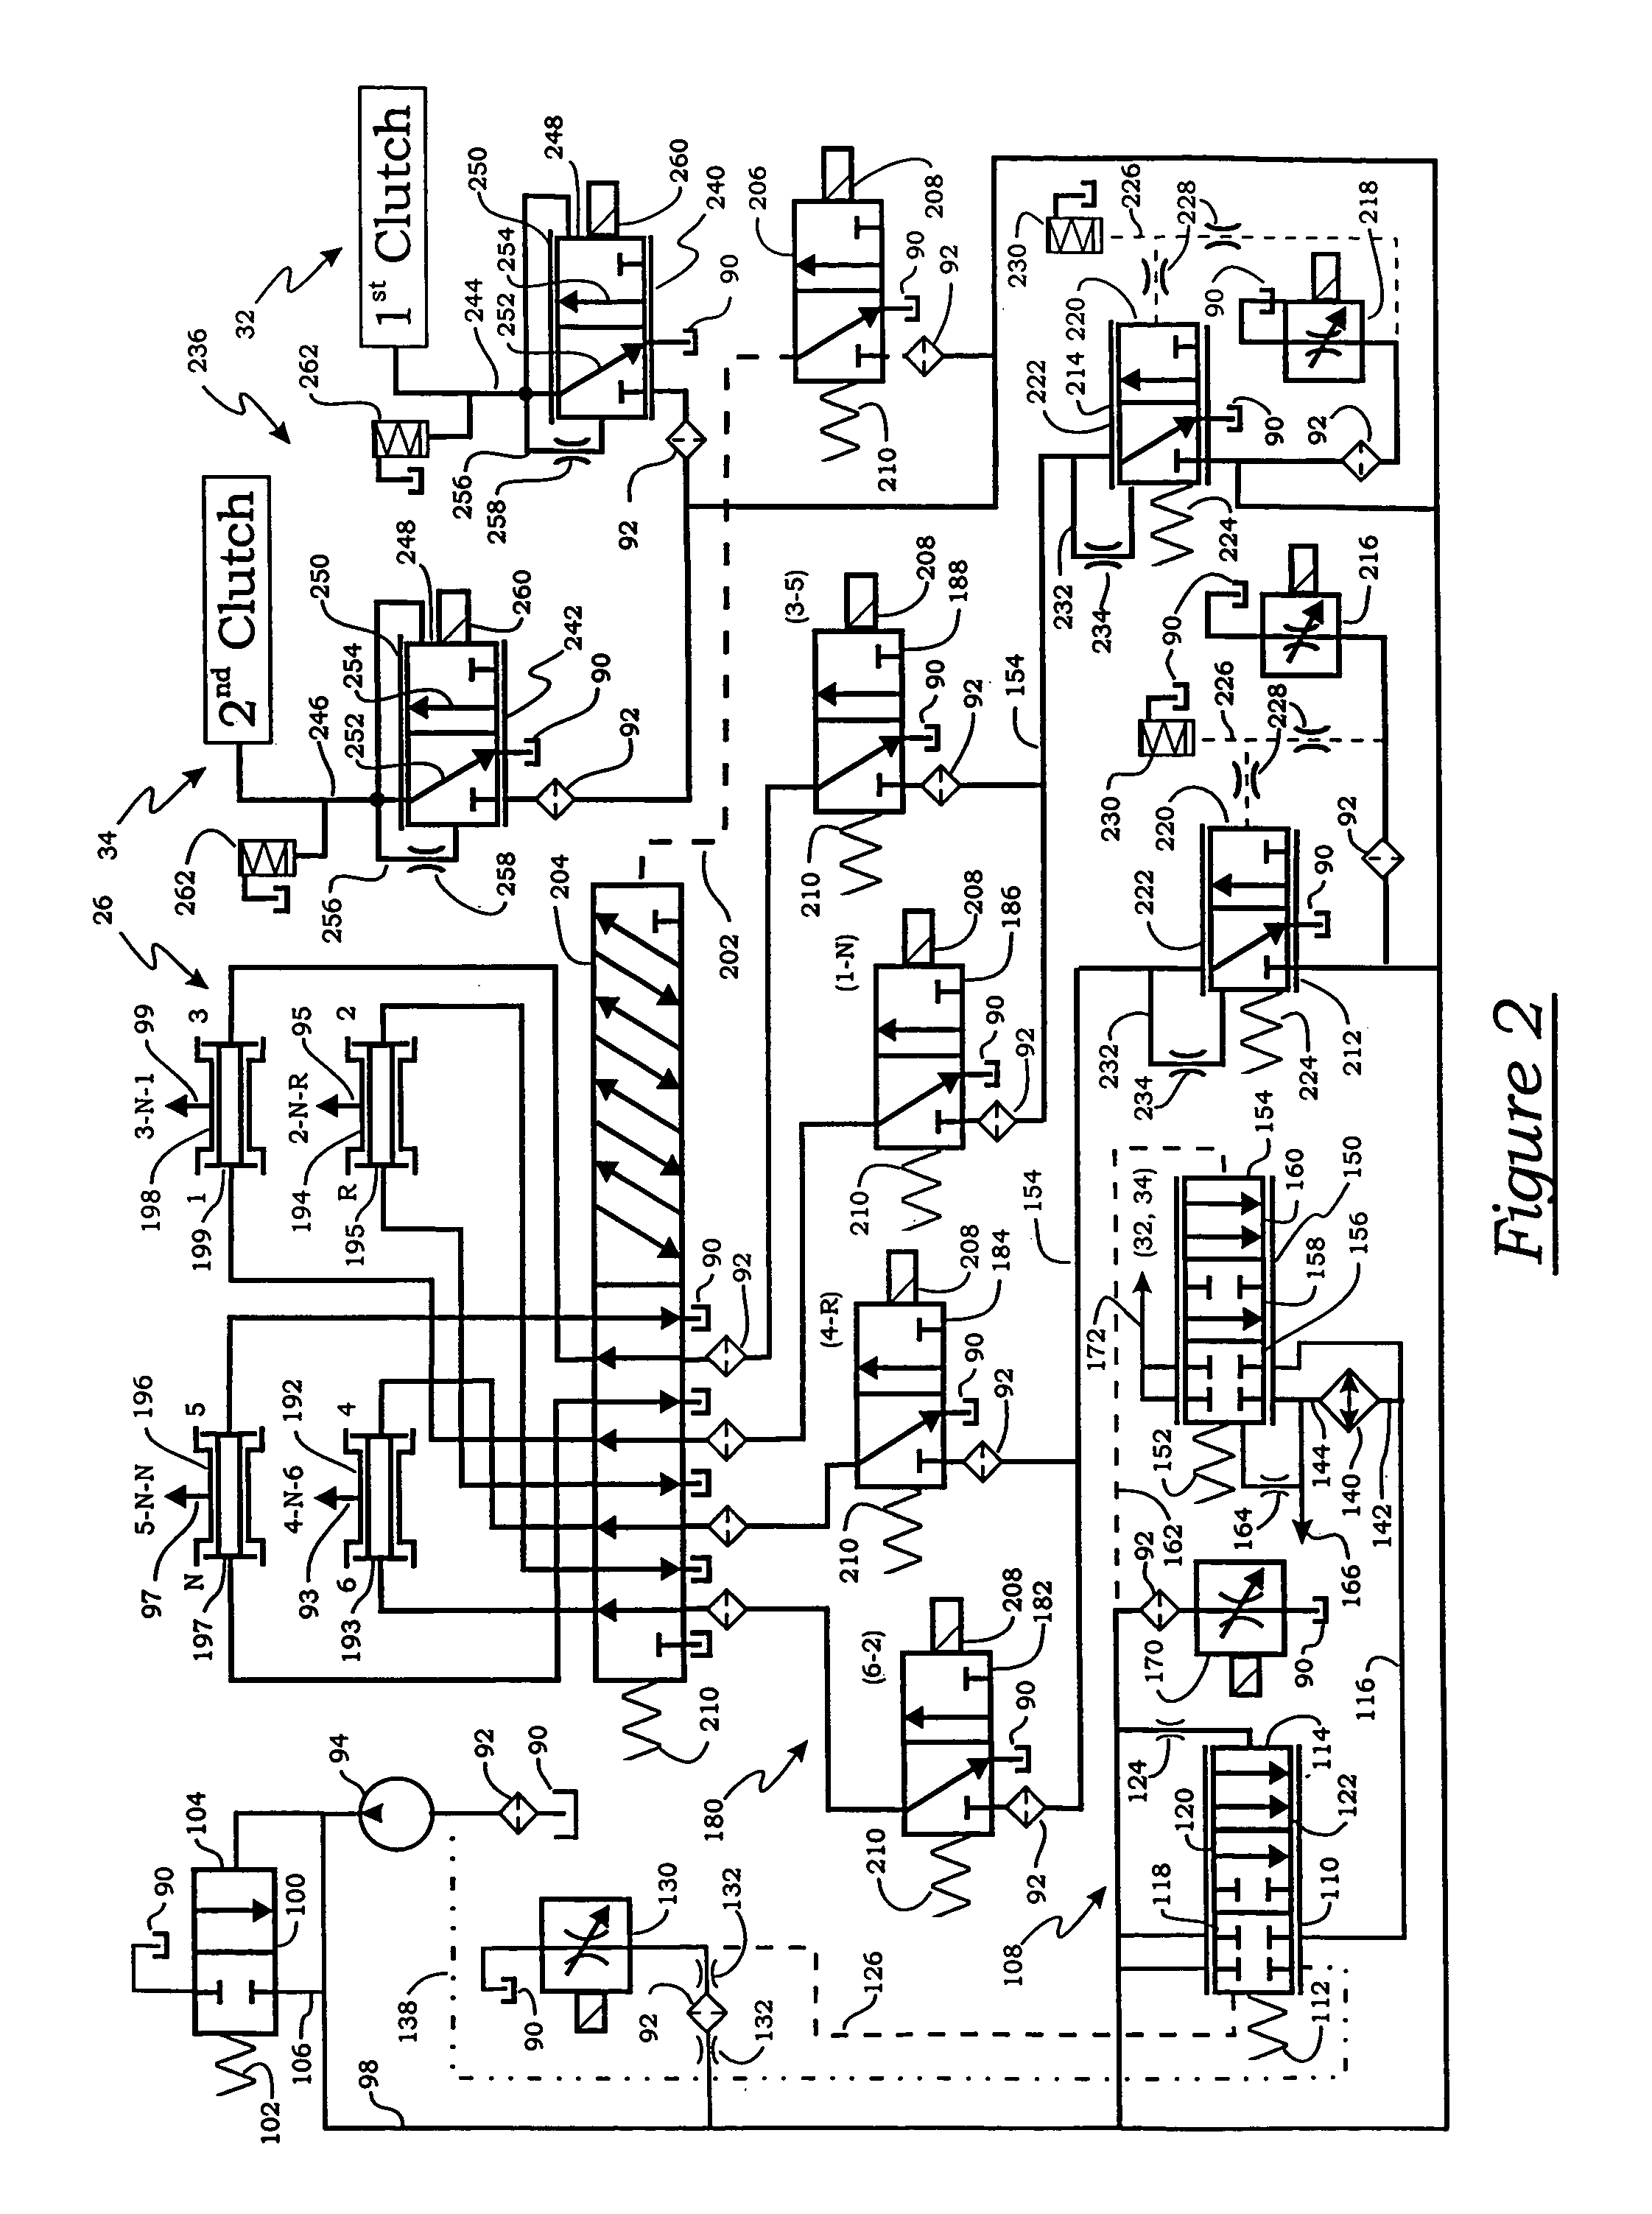 Integrated control module for use in a dual clutch transmission having integrated shift actuator position sensors